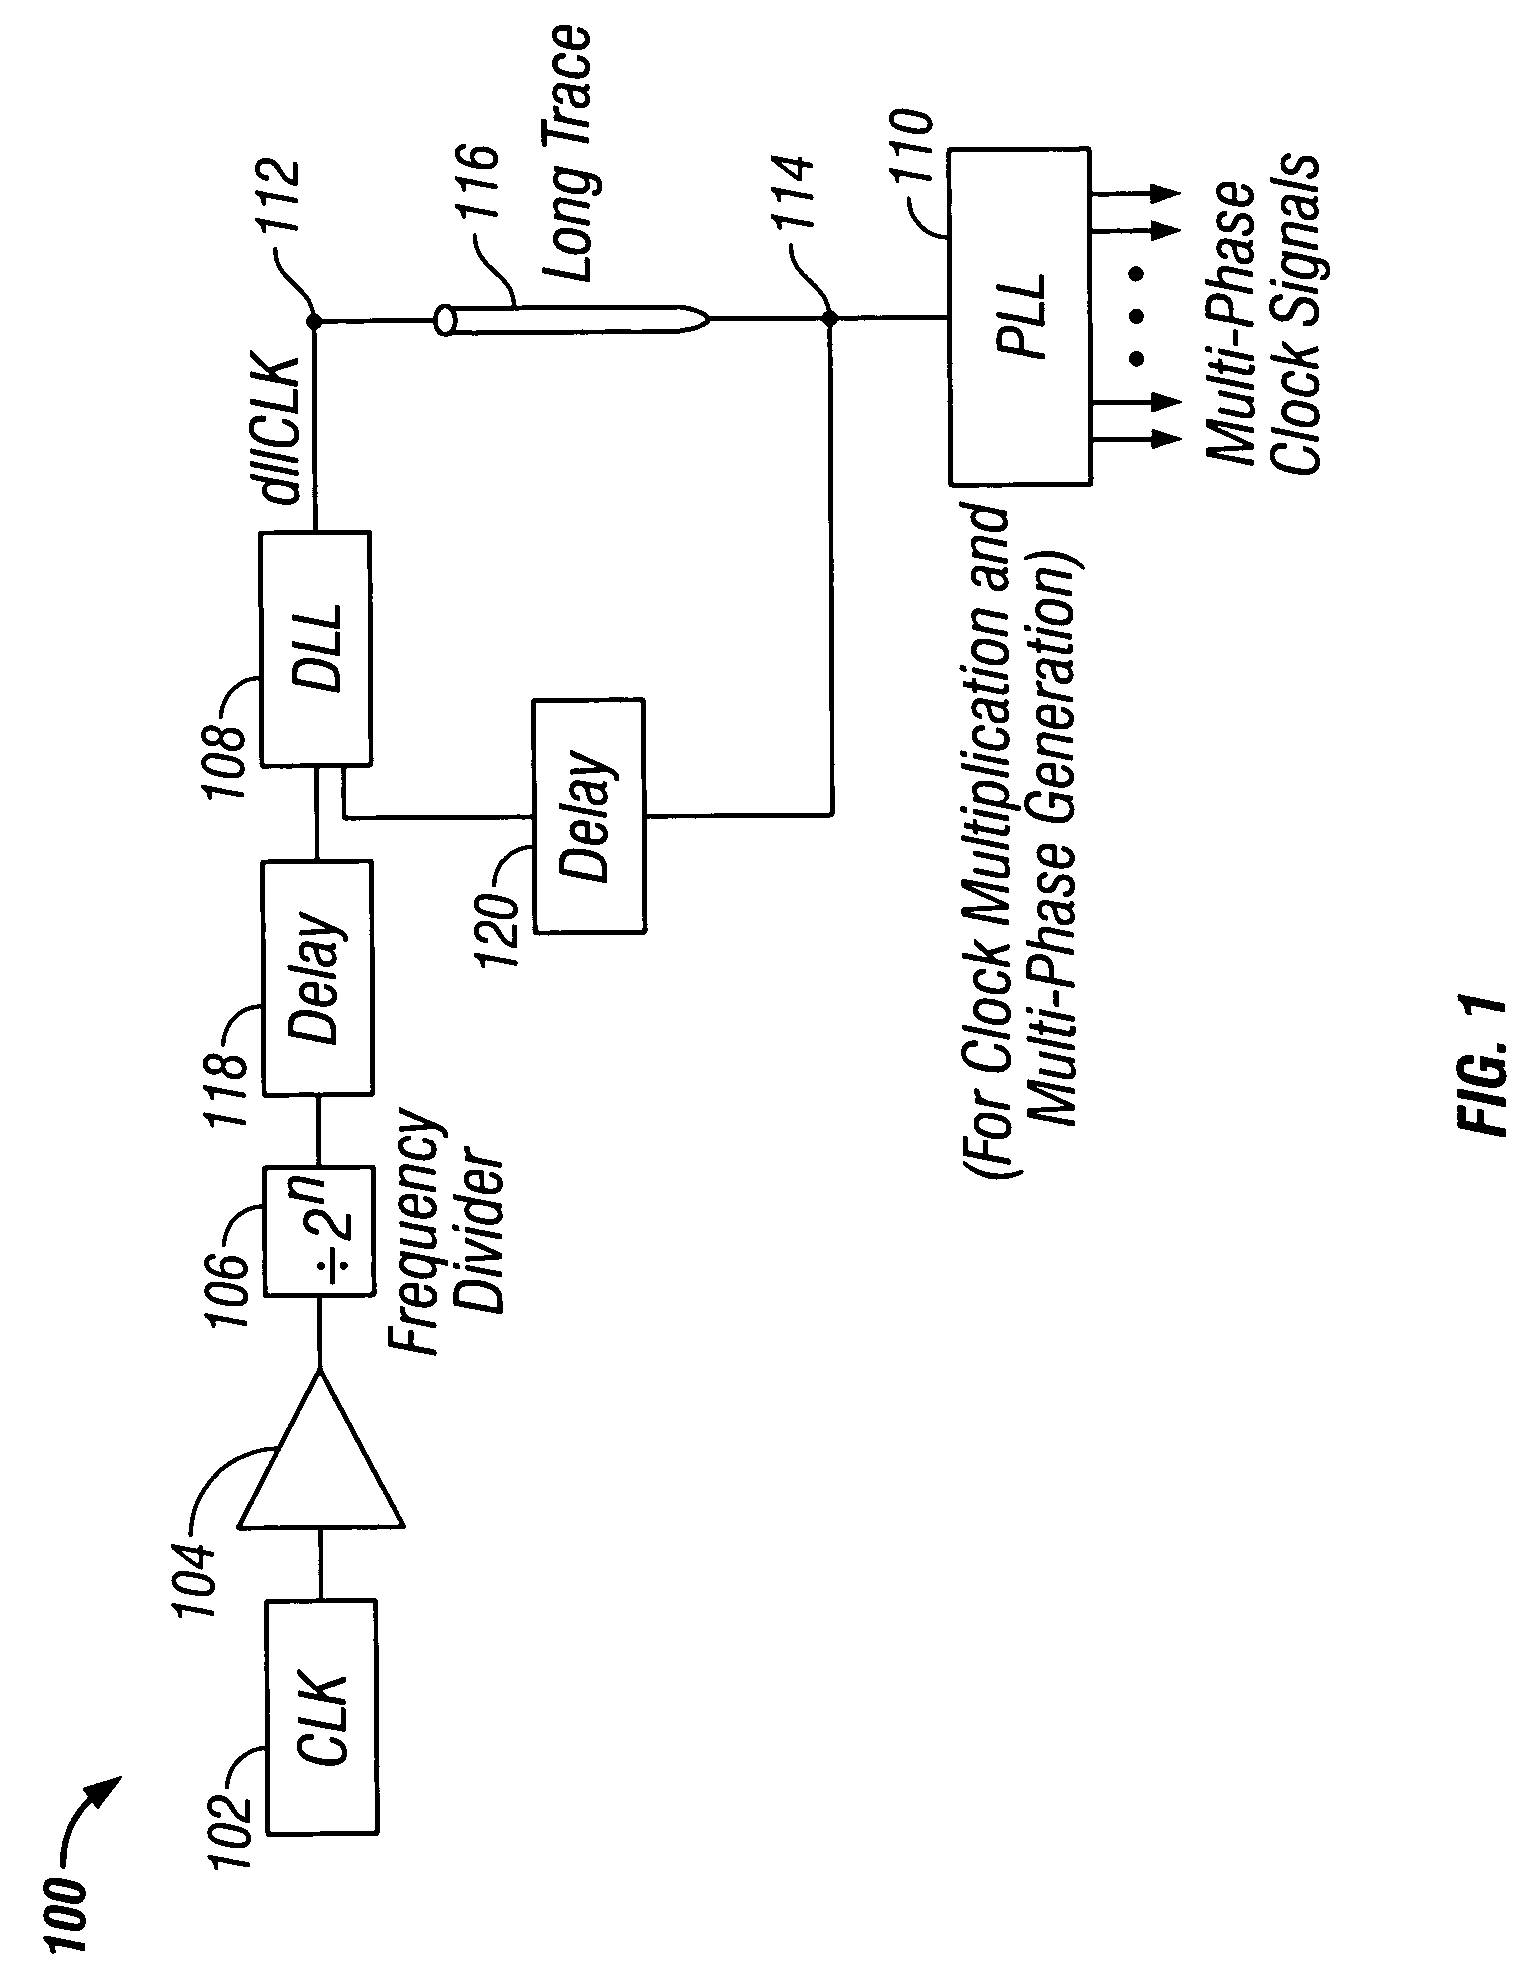 Clock signal distribution with reduced parasitic loading effects